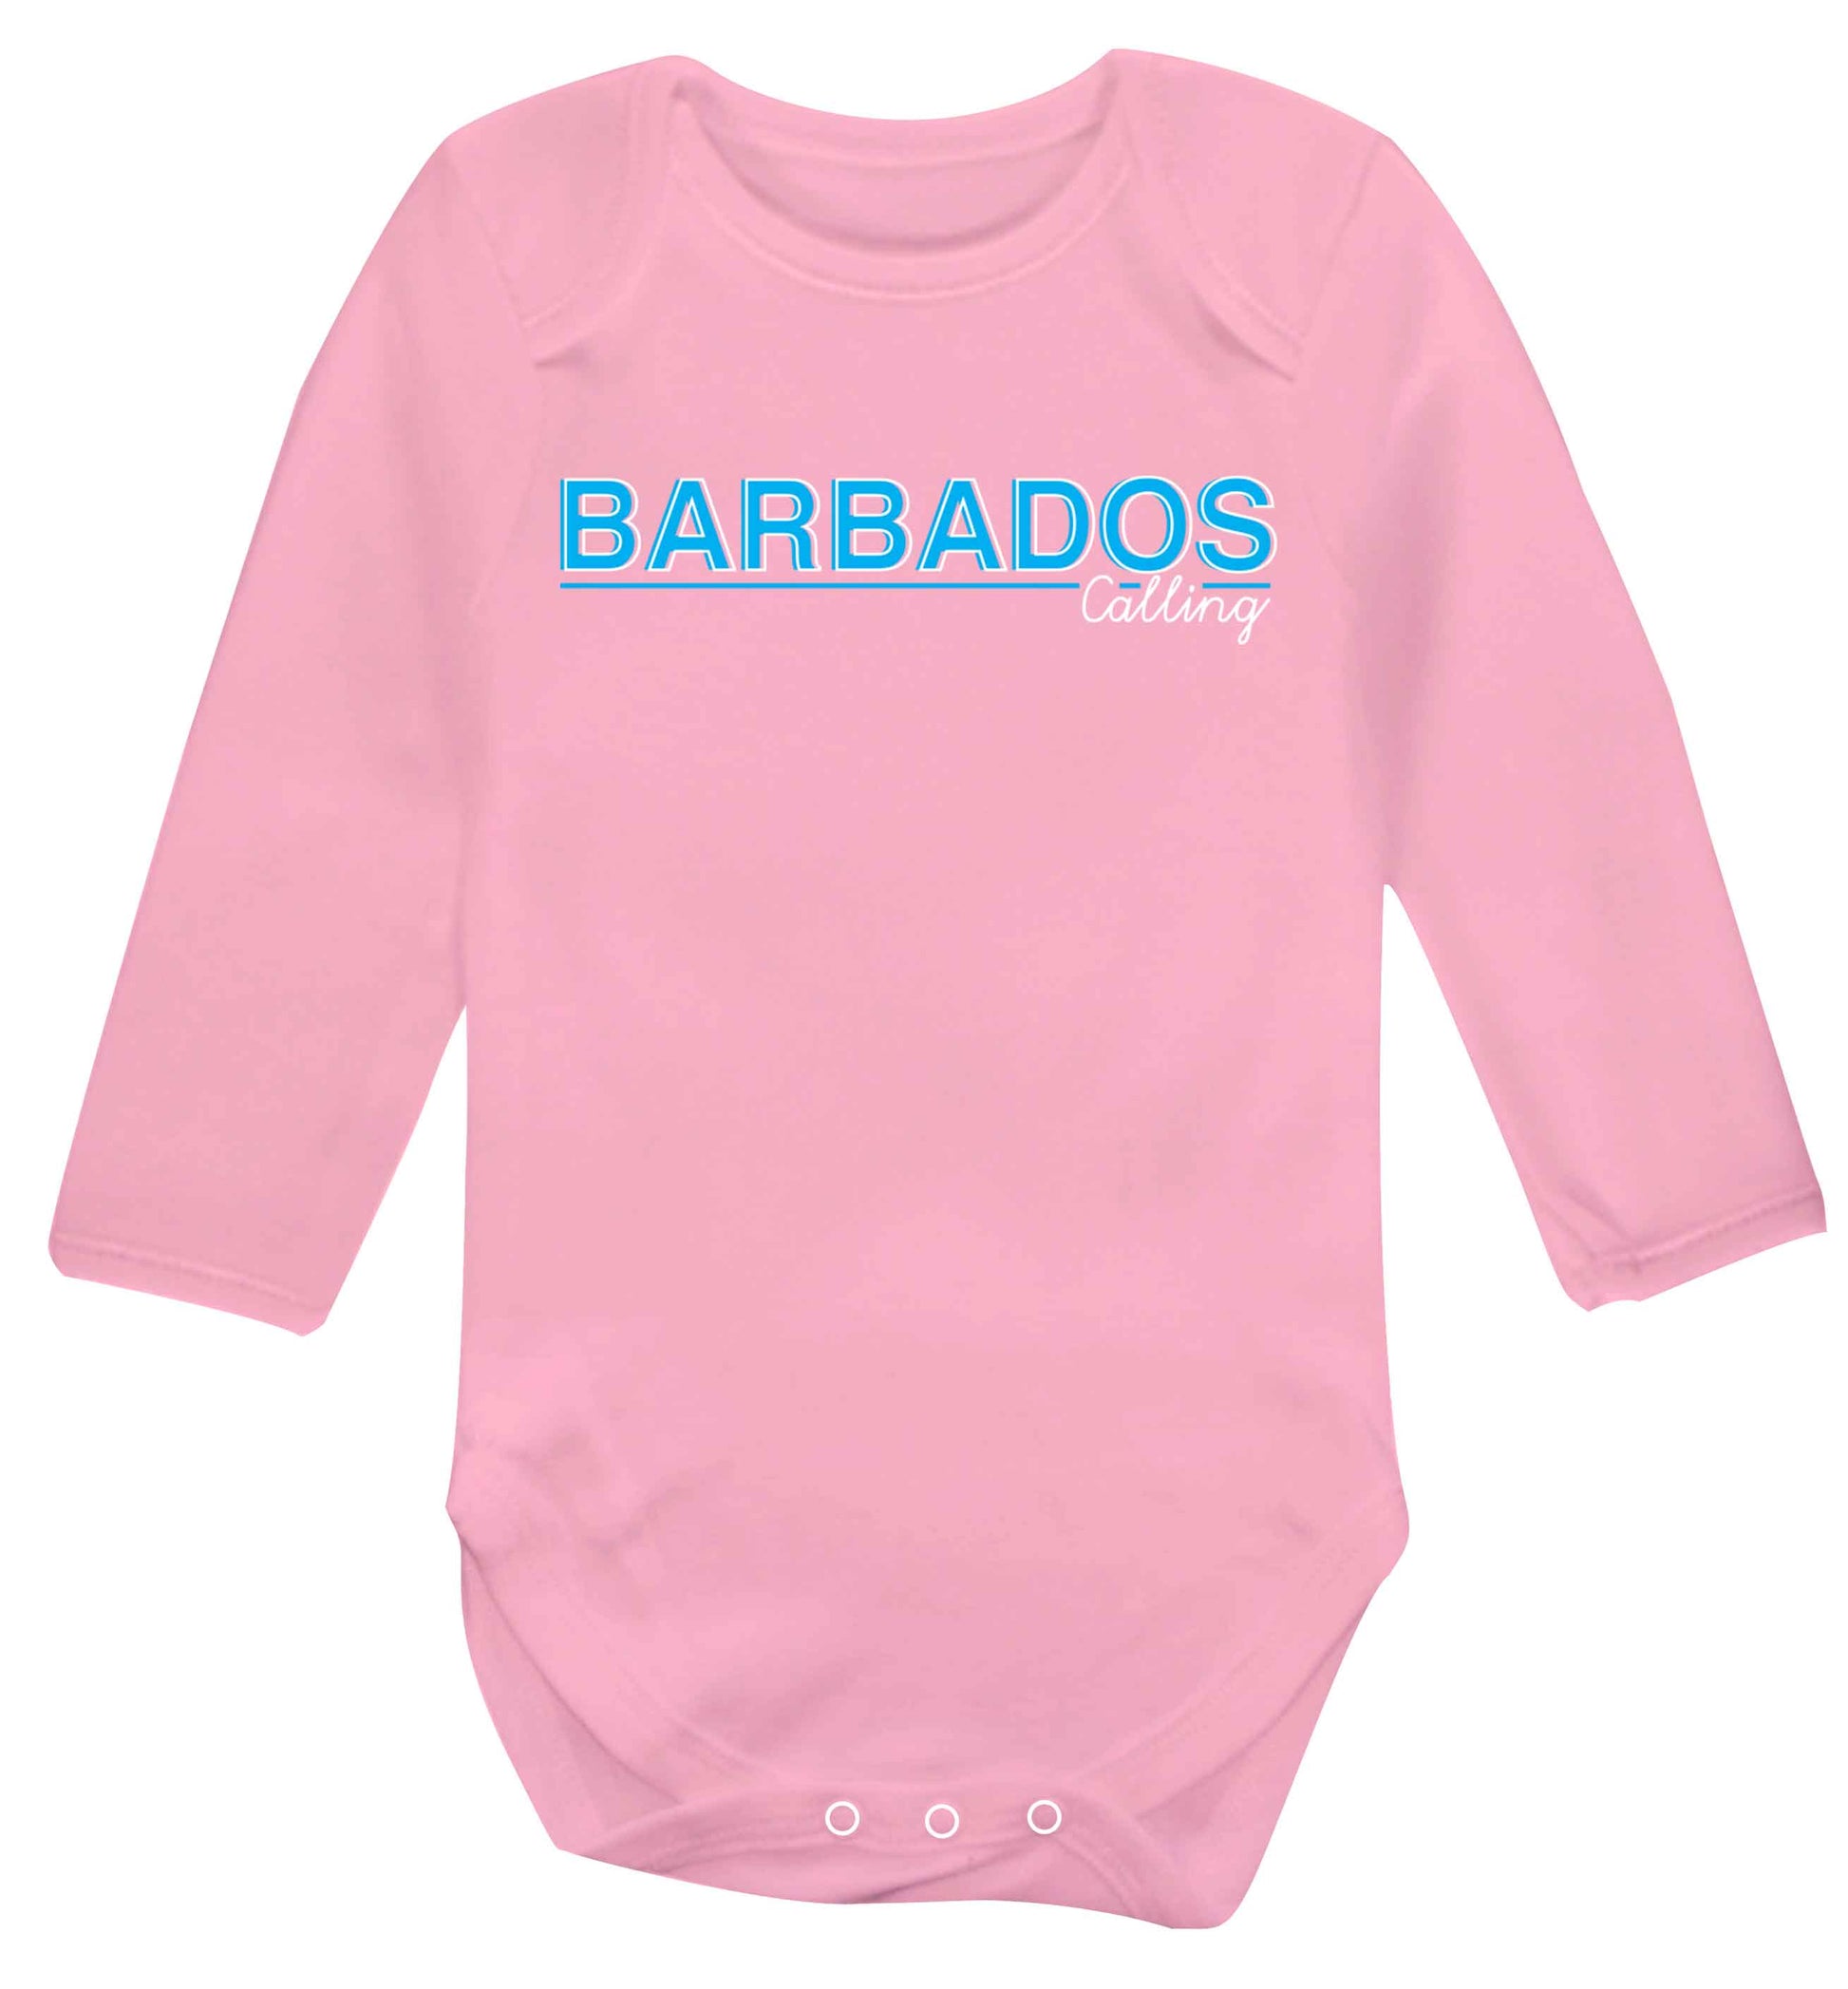 Barbados calling Baby Vest long sleeved pale pink 6-12 months